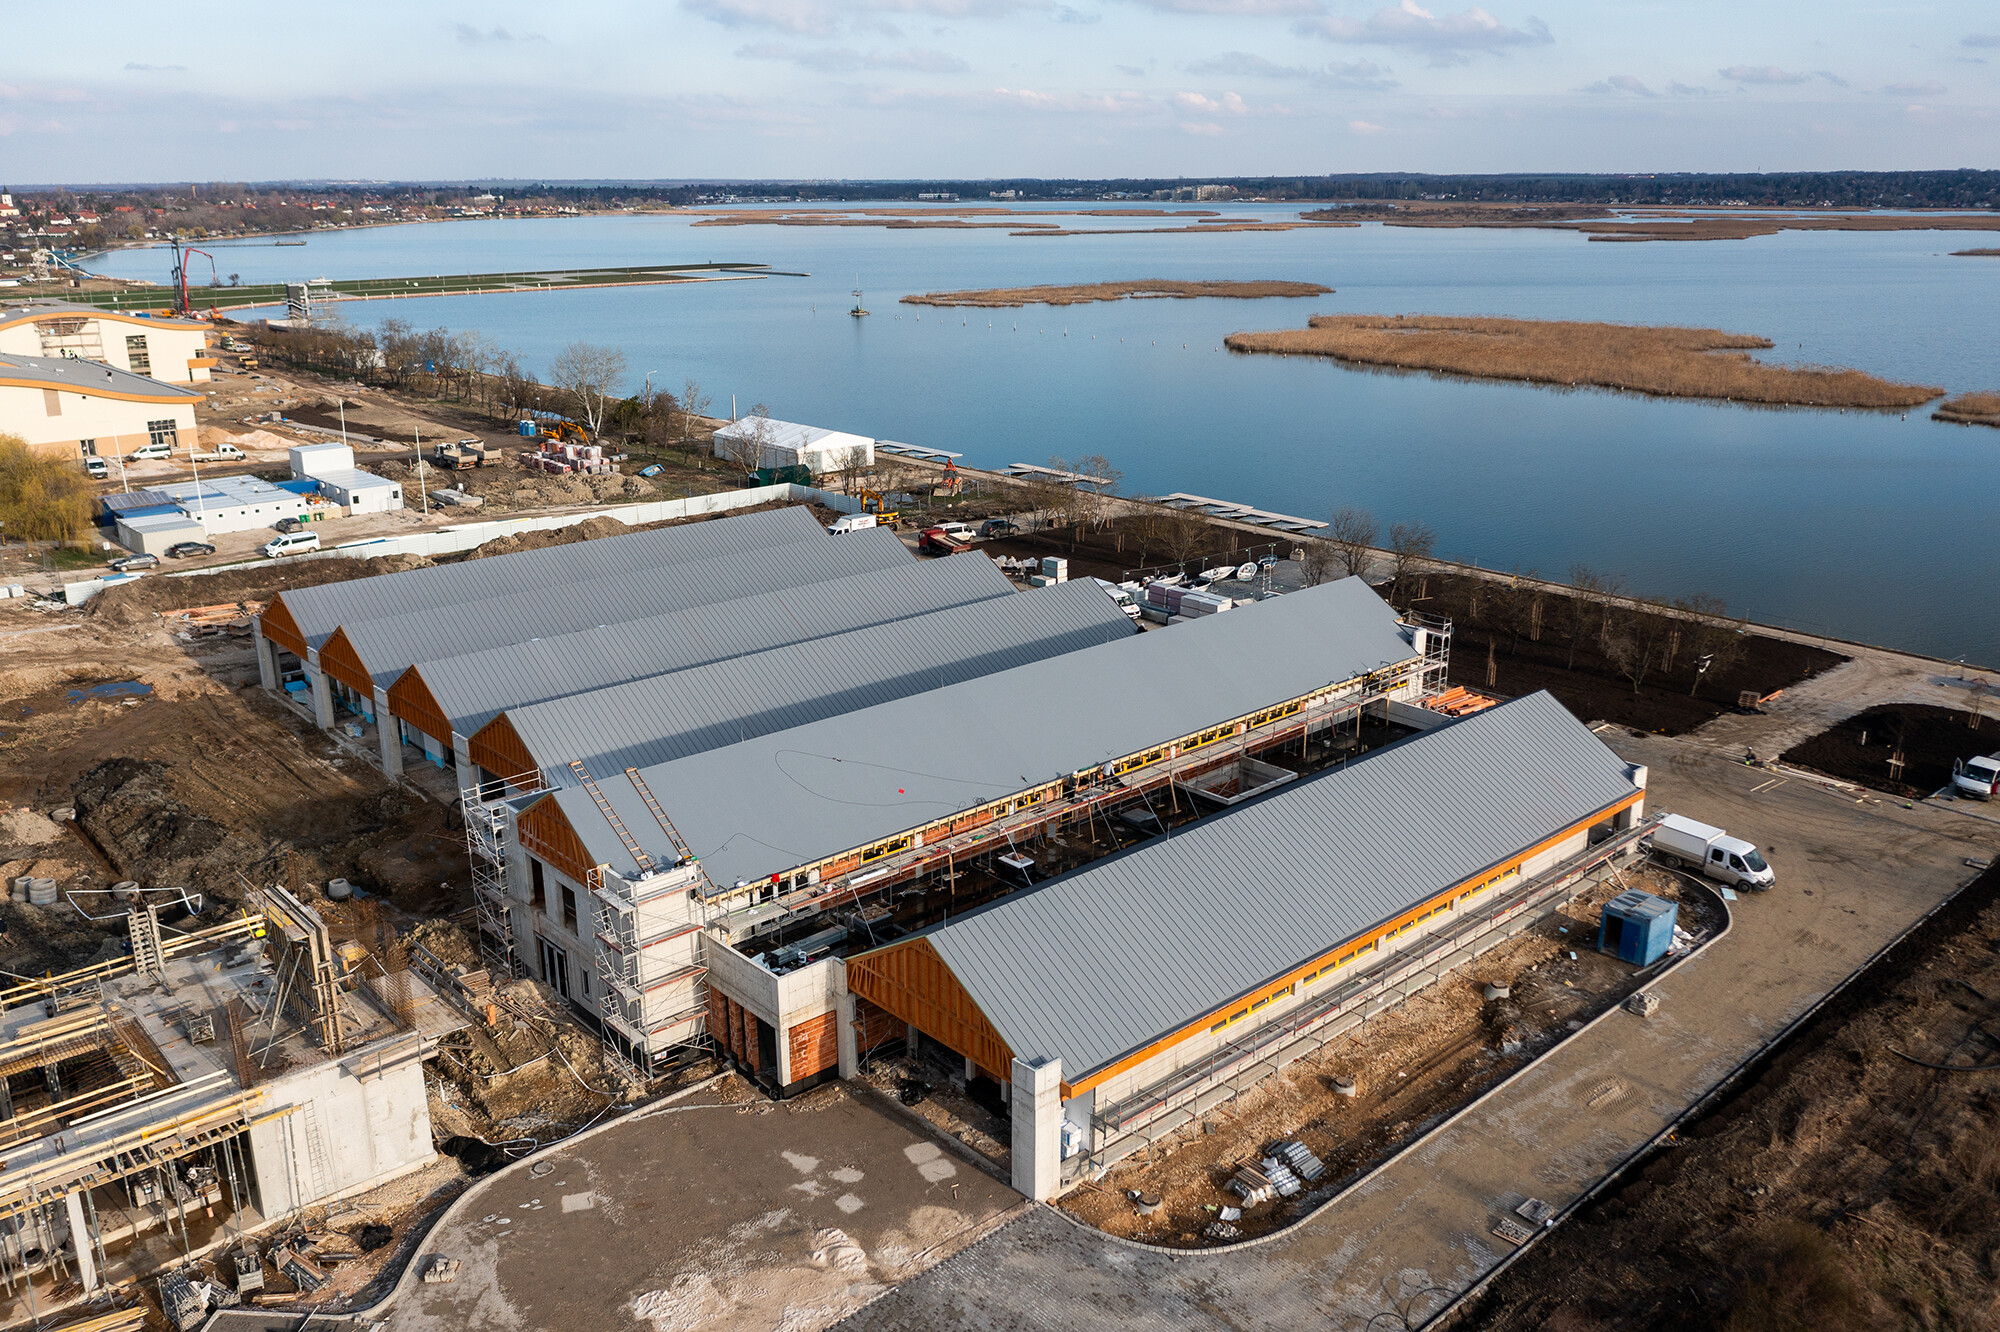 The kayak center built with world-class solutions is nearing completion